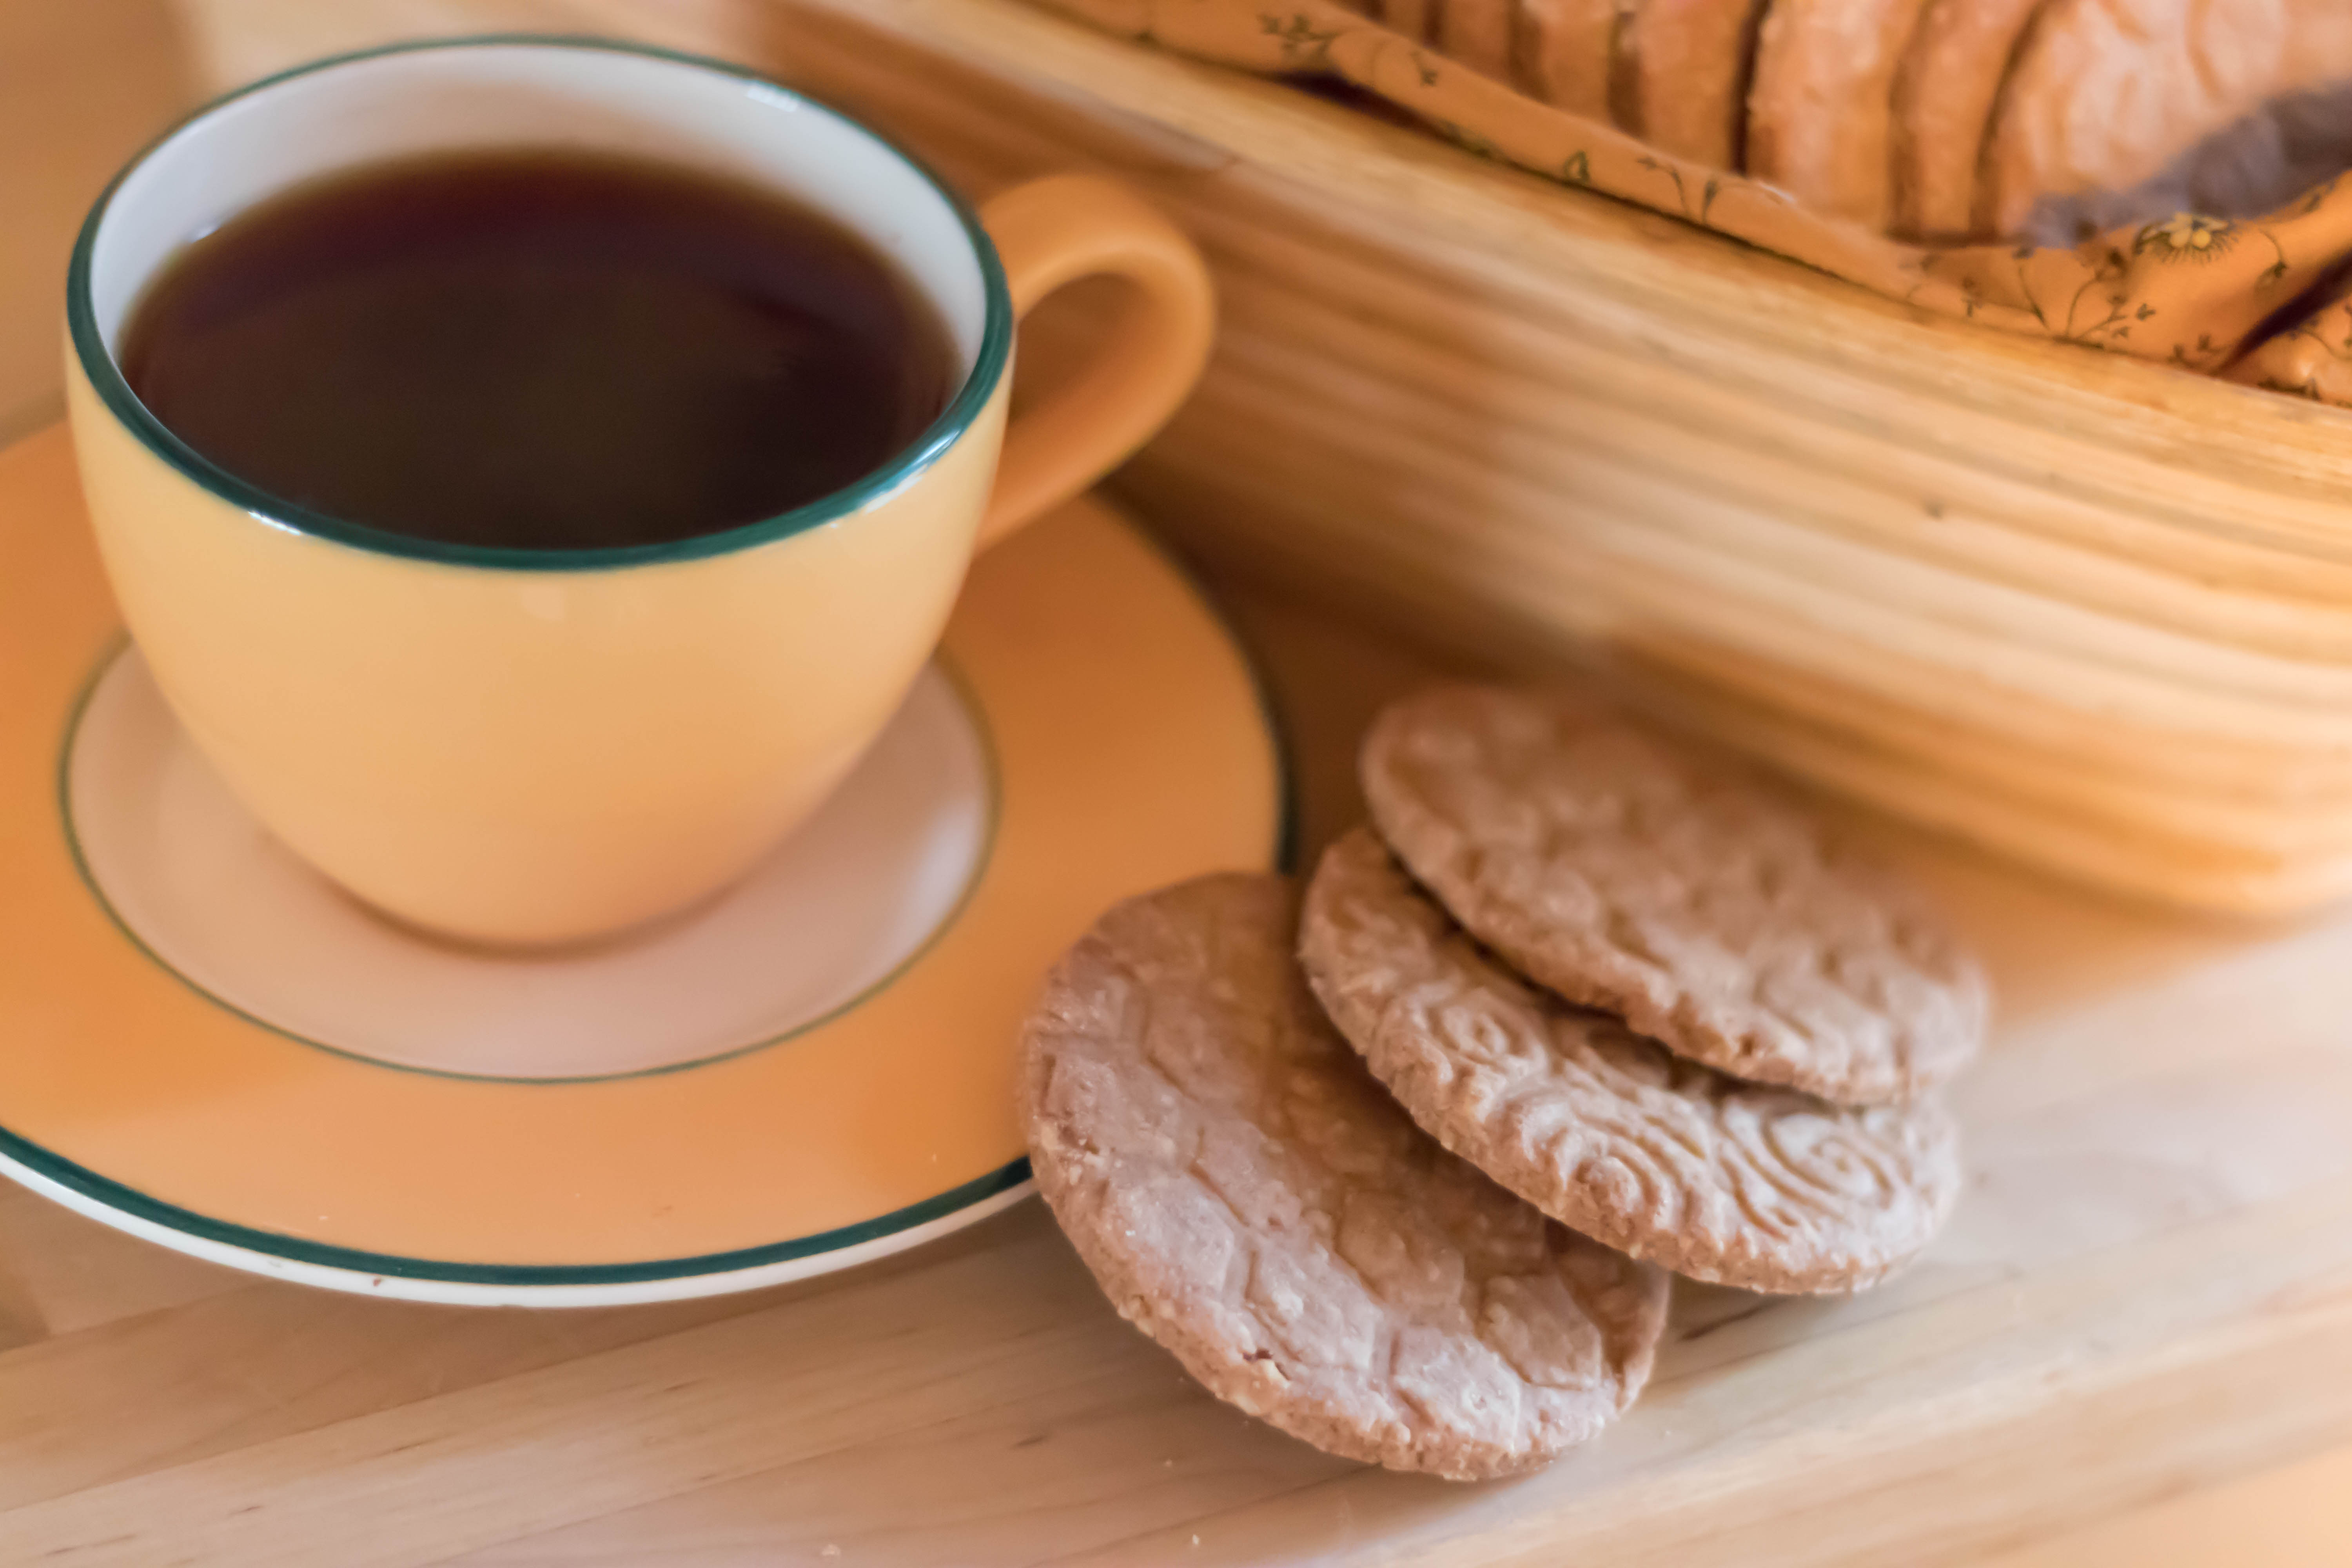 Tea with digestive biscuits